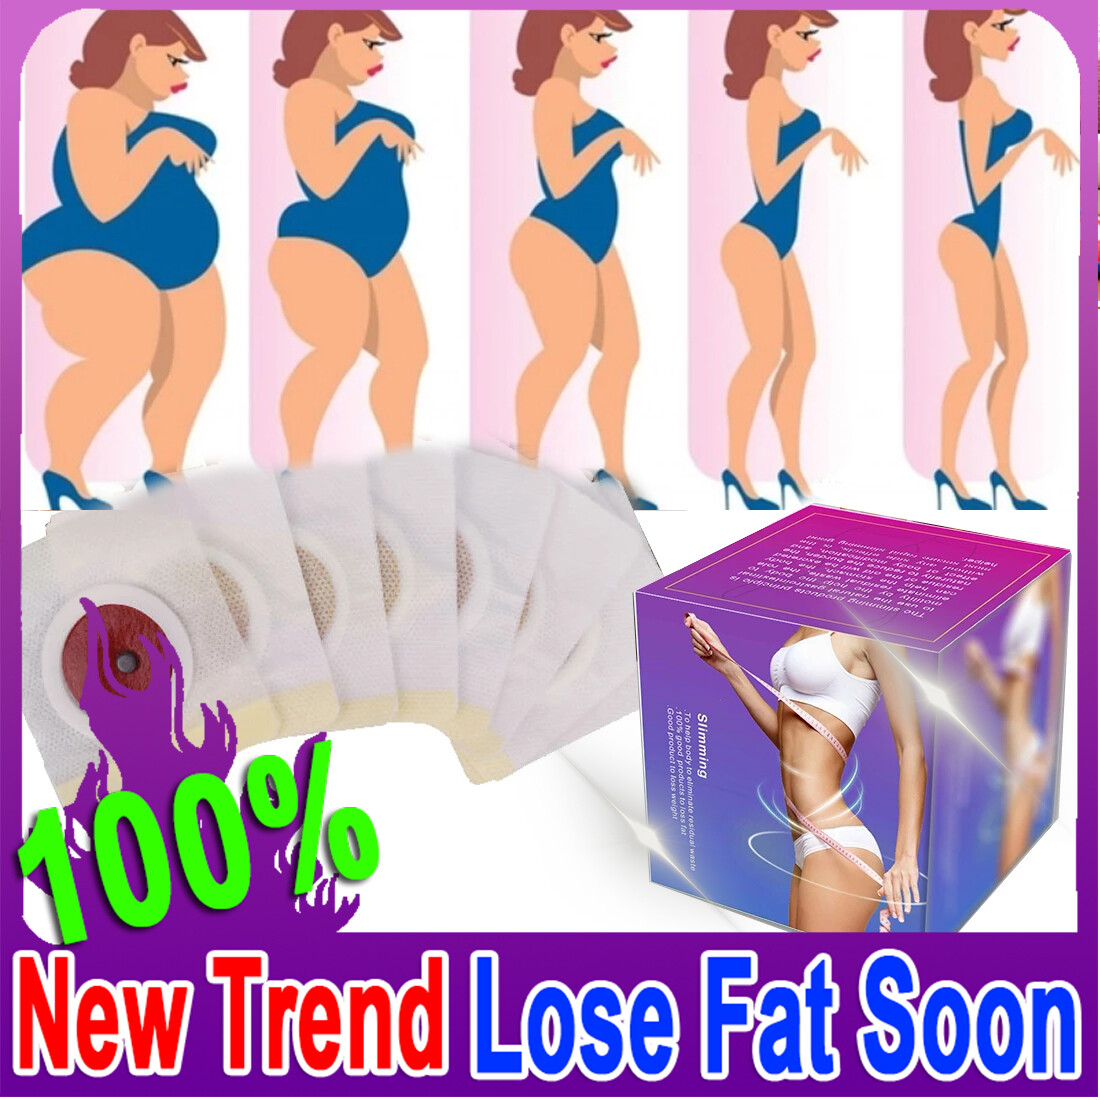 100pcs-Strongest-Fat-Burning-Cellulite-Slimming-Diets-patch-Weight-Loss-Products-Detox-Face-Lift-Decreased-Appetite